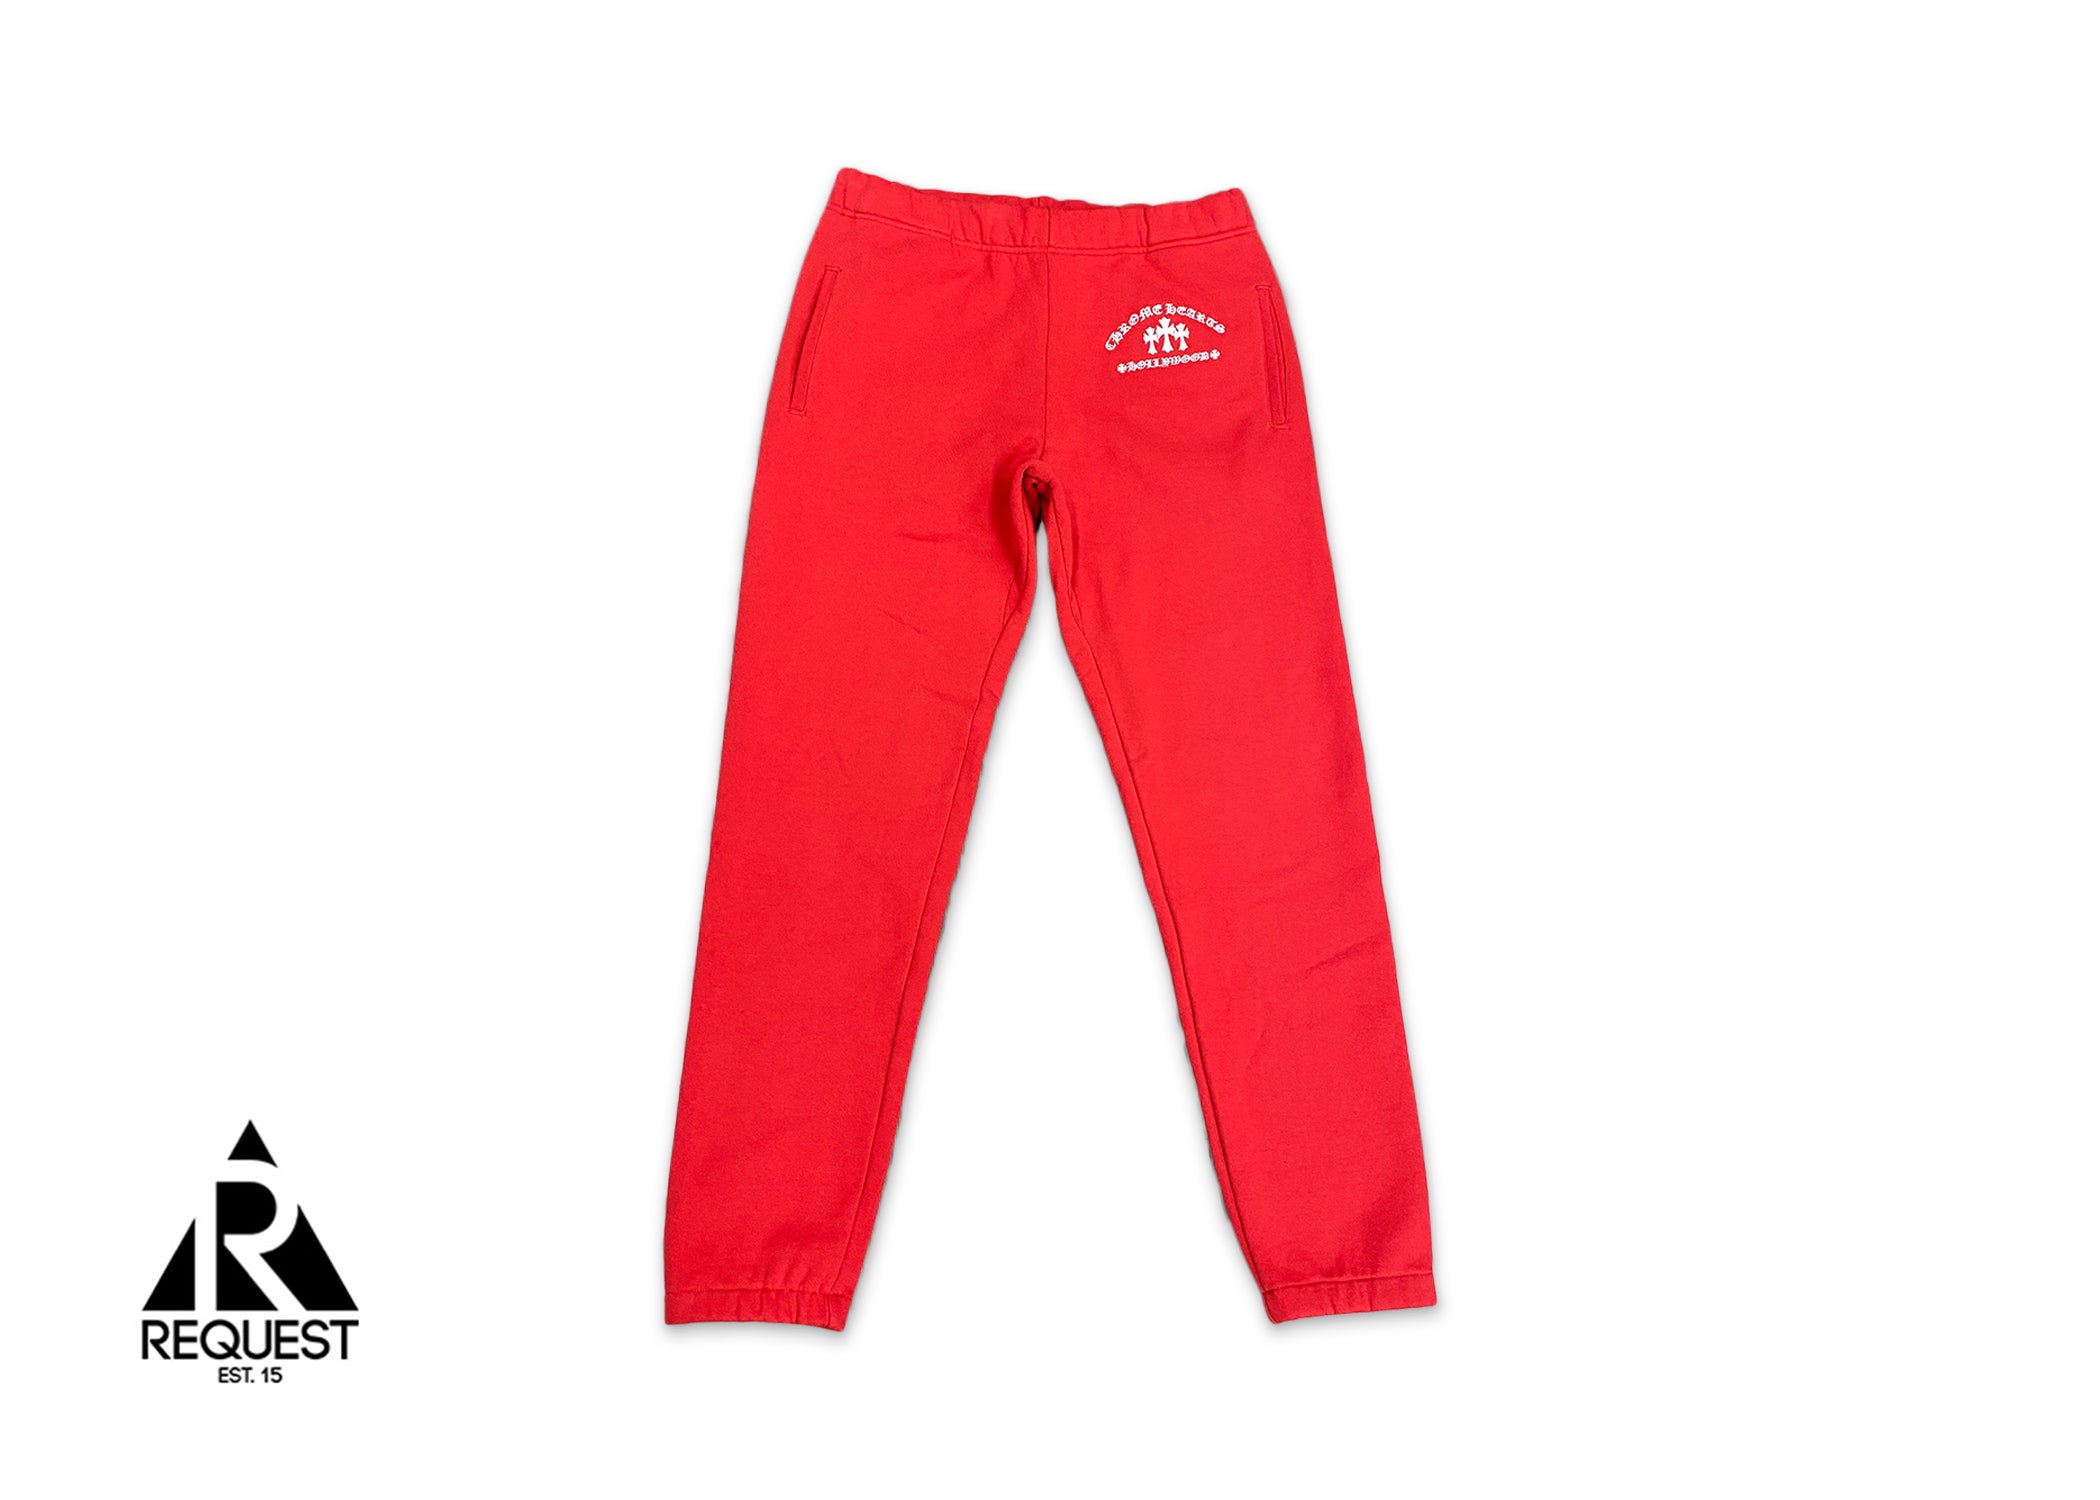 Chrome Hearts Cross Sweatpants “Red Hollywood”